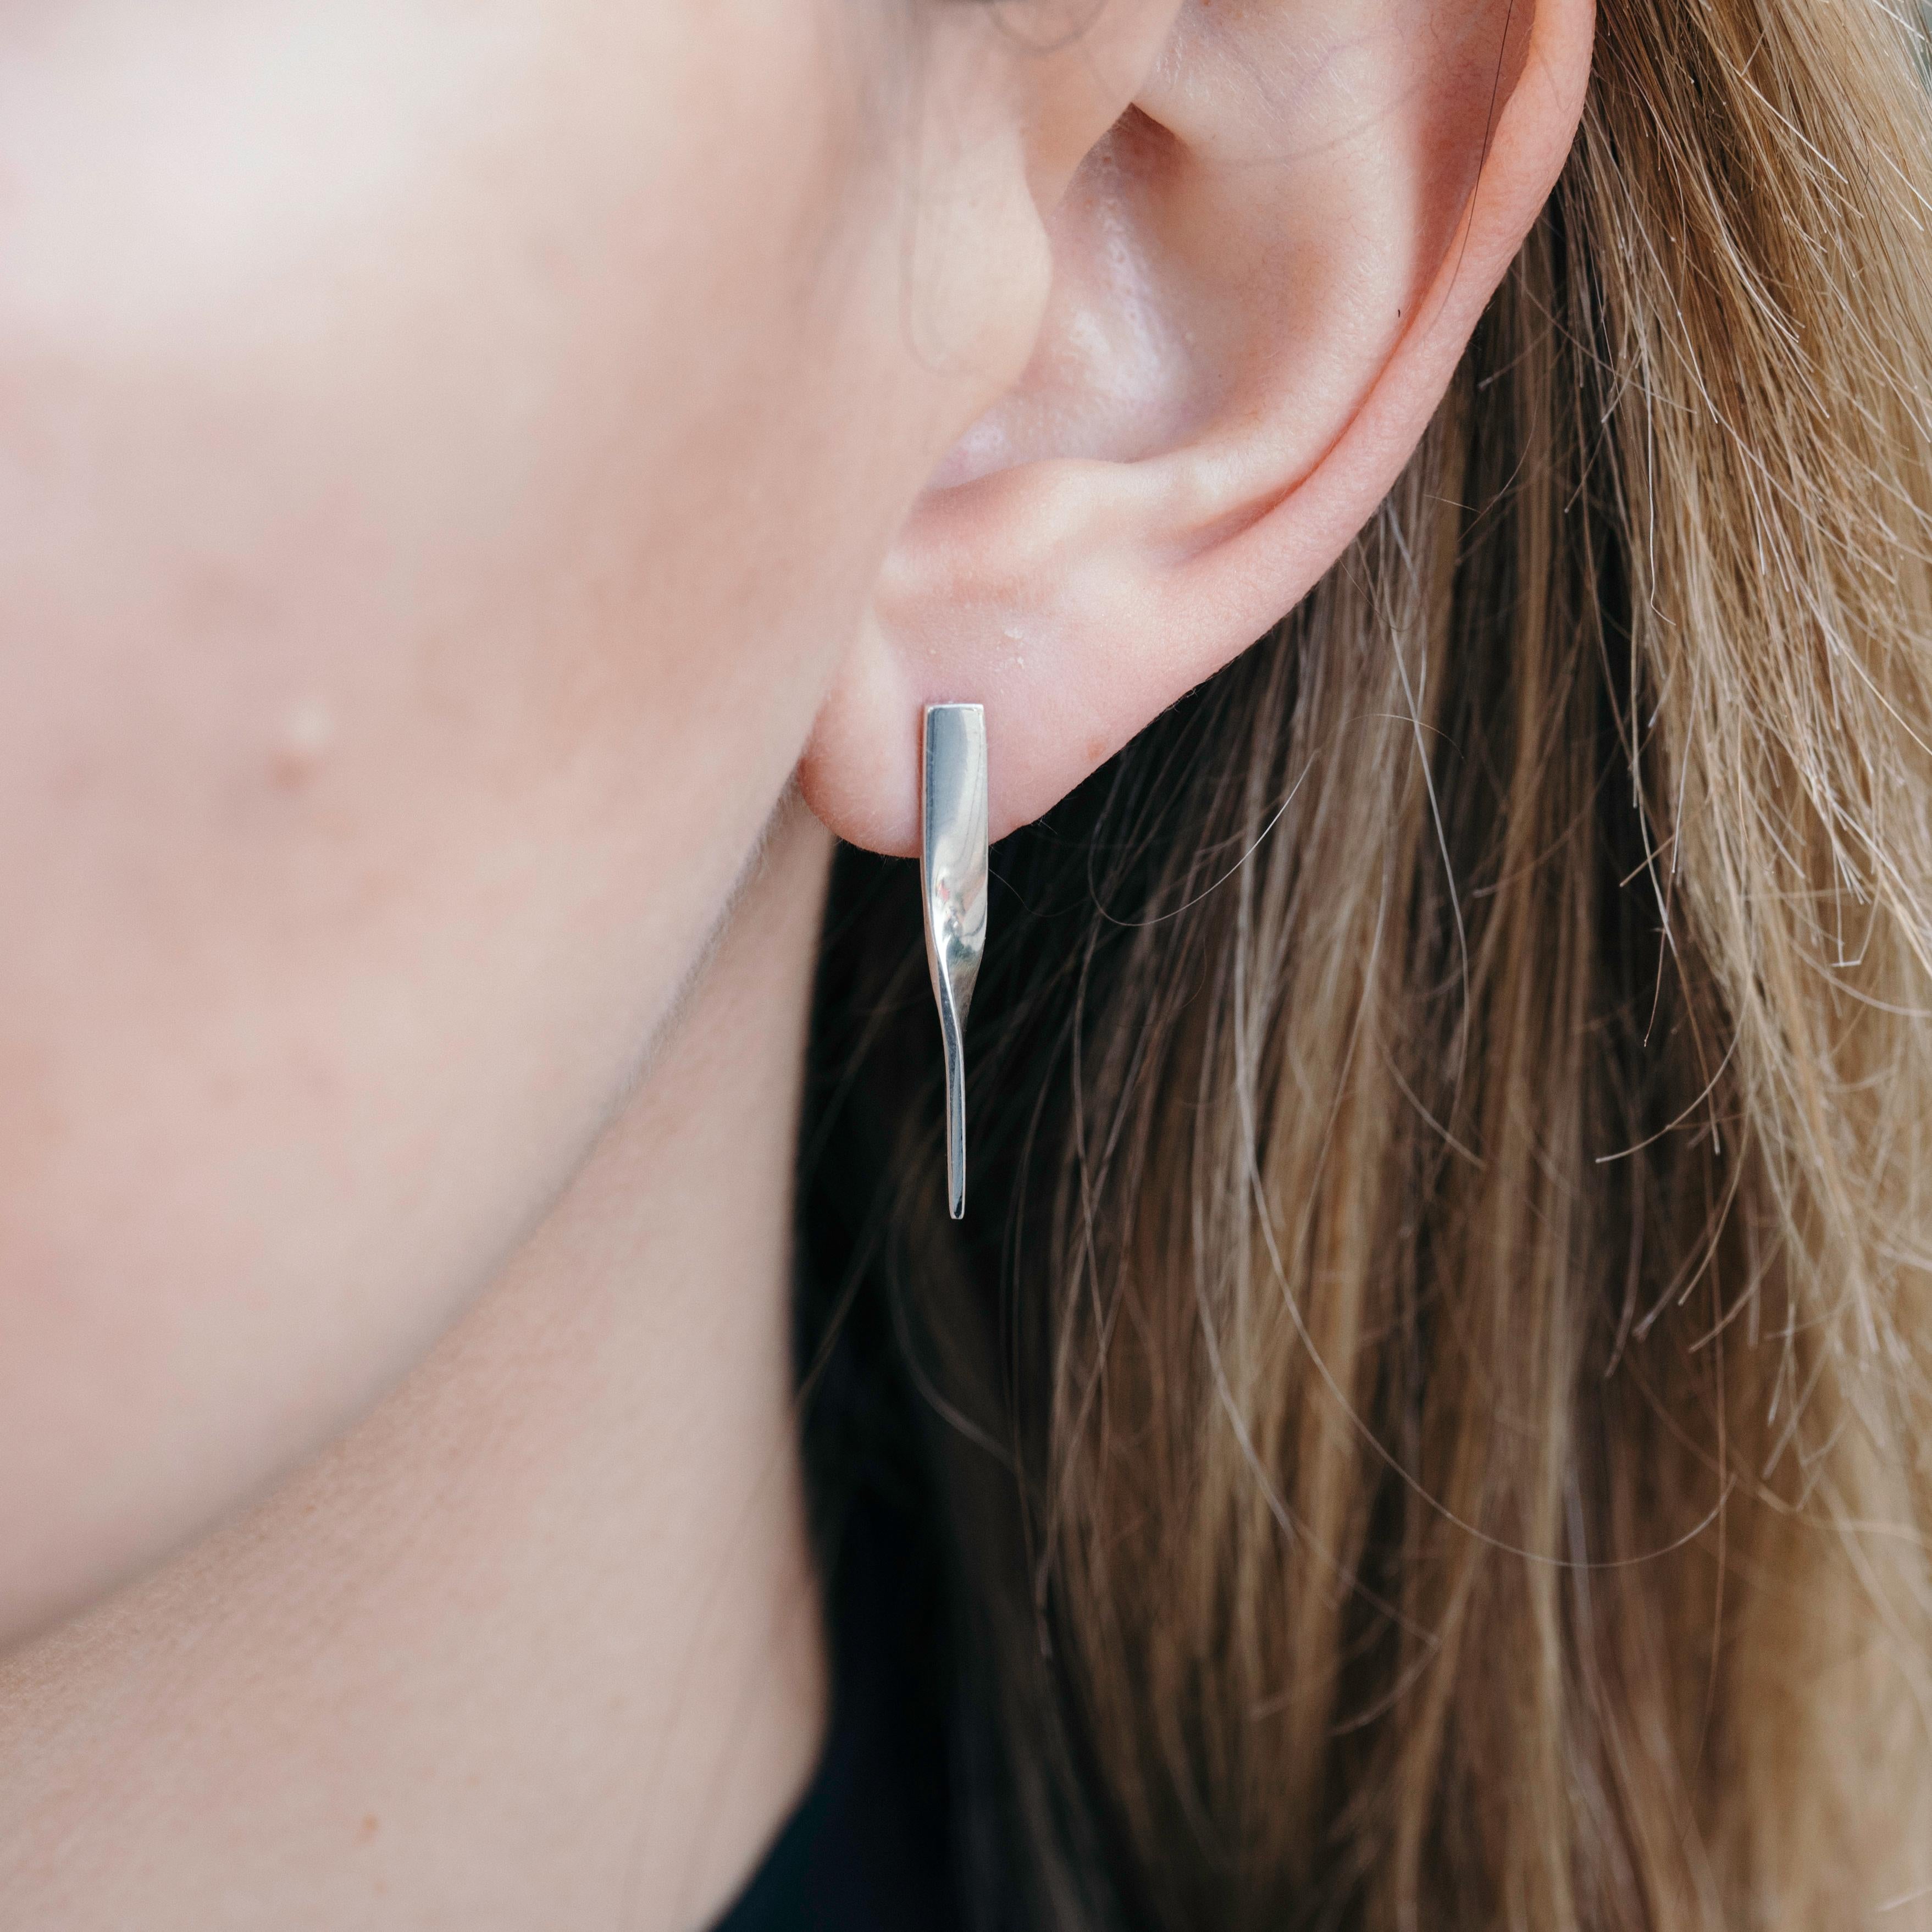 The Shift Earrings taper and twist in unison as they make a graceful quarter turn. The two earrings mirror each other and can be interchanged to reverse their orientation to the face. Their subtle transformation is an ode to shifting perspectives.